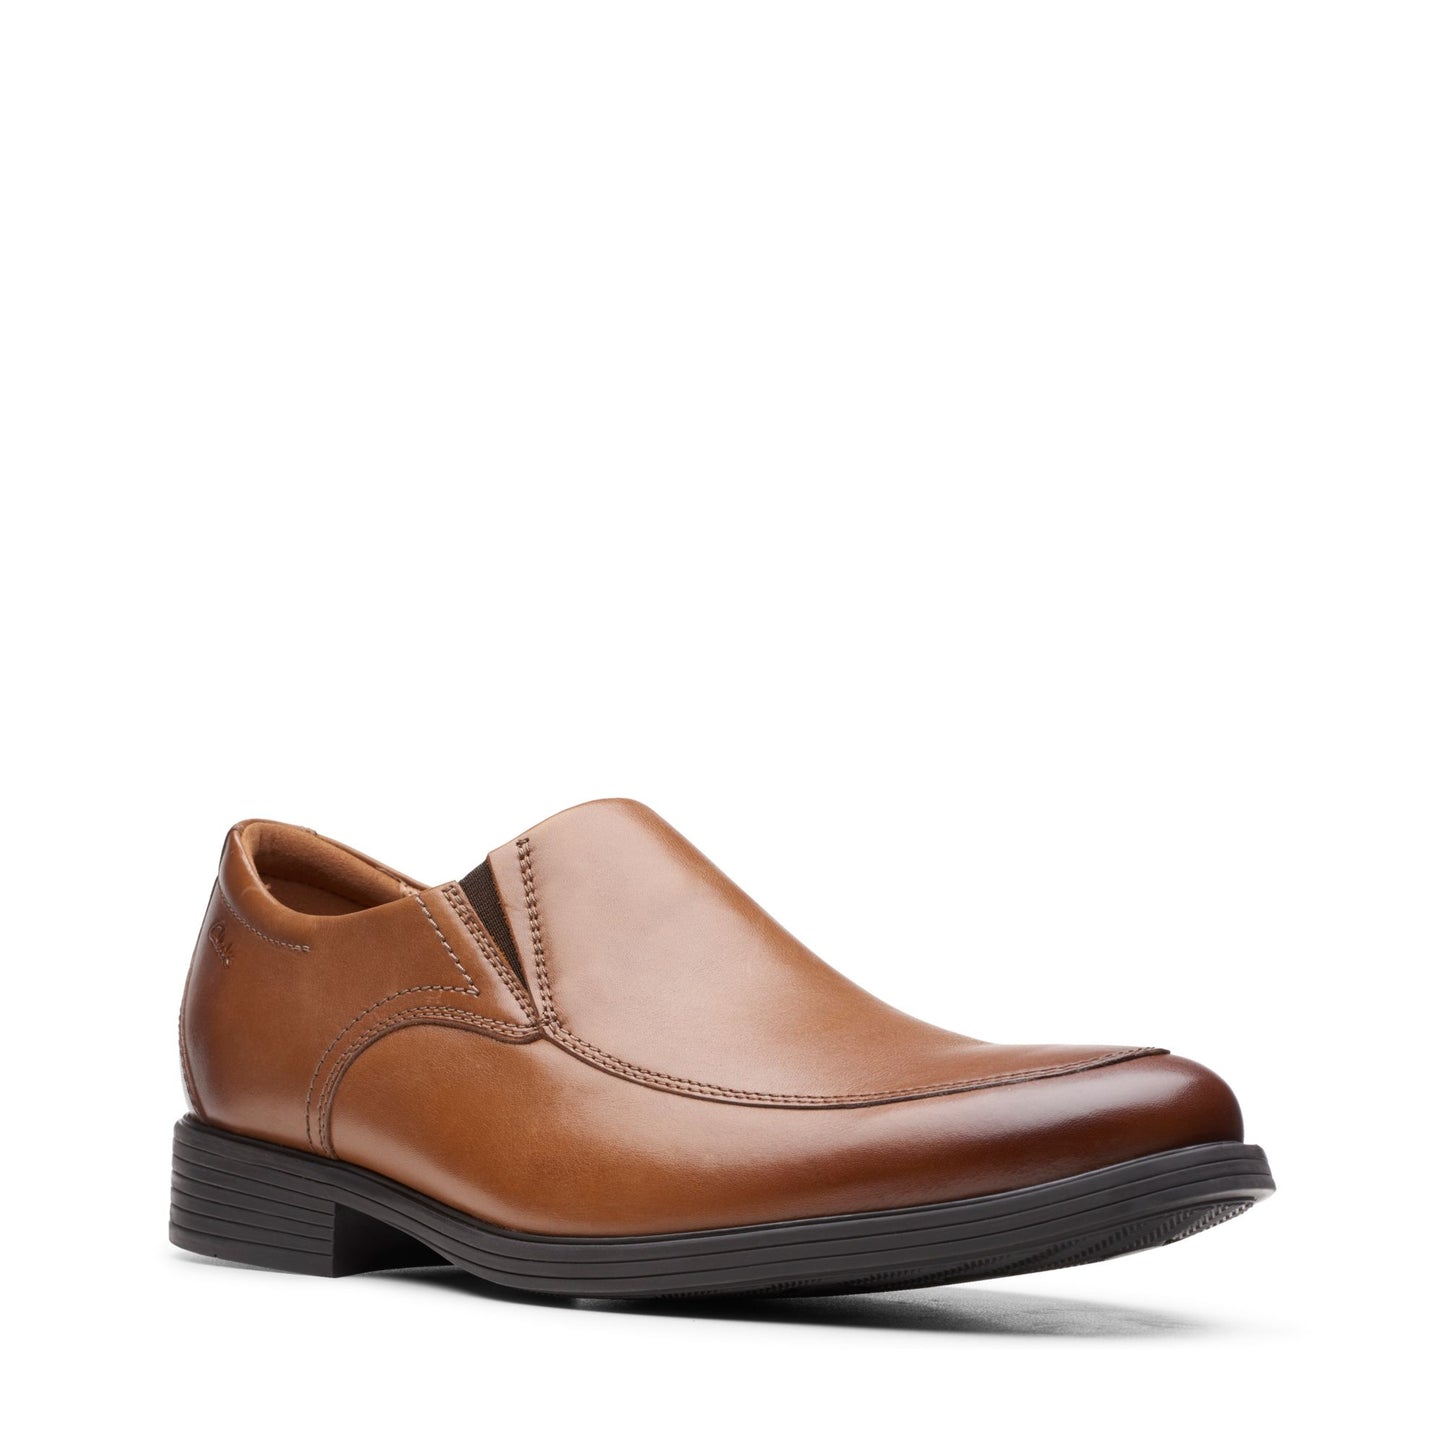 Men's Whiddon Step by Clarks